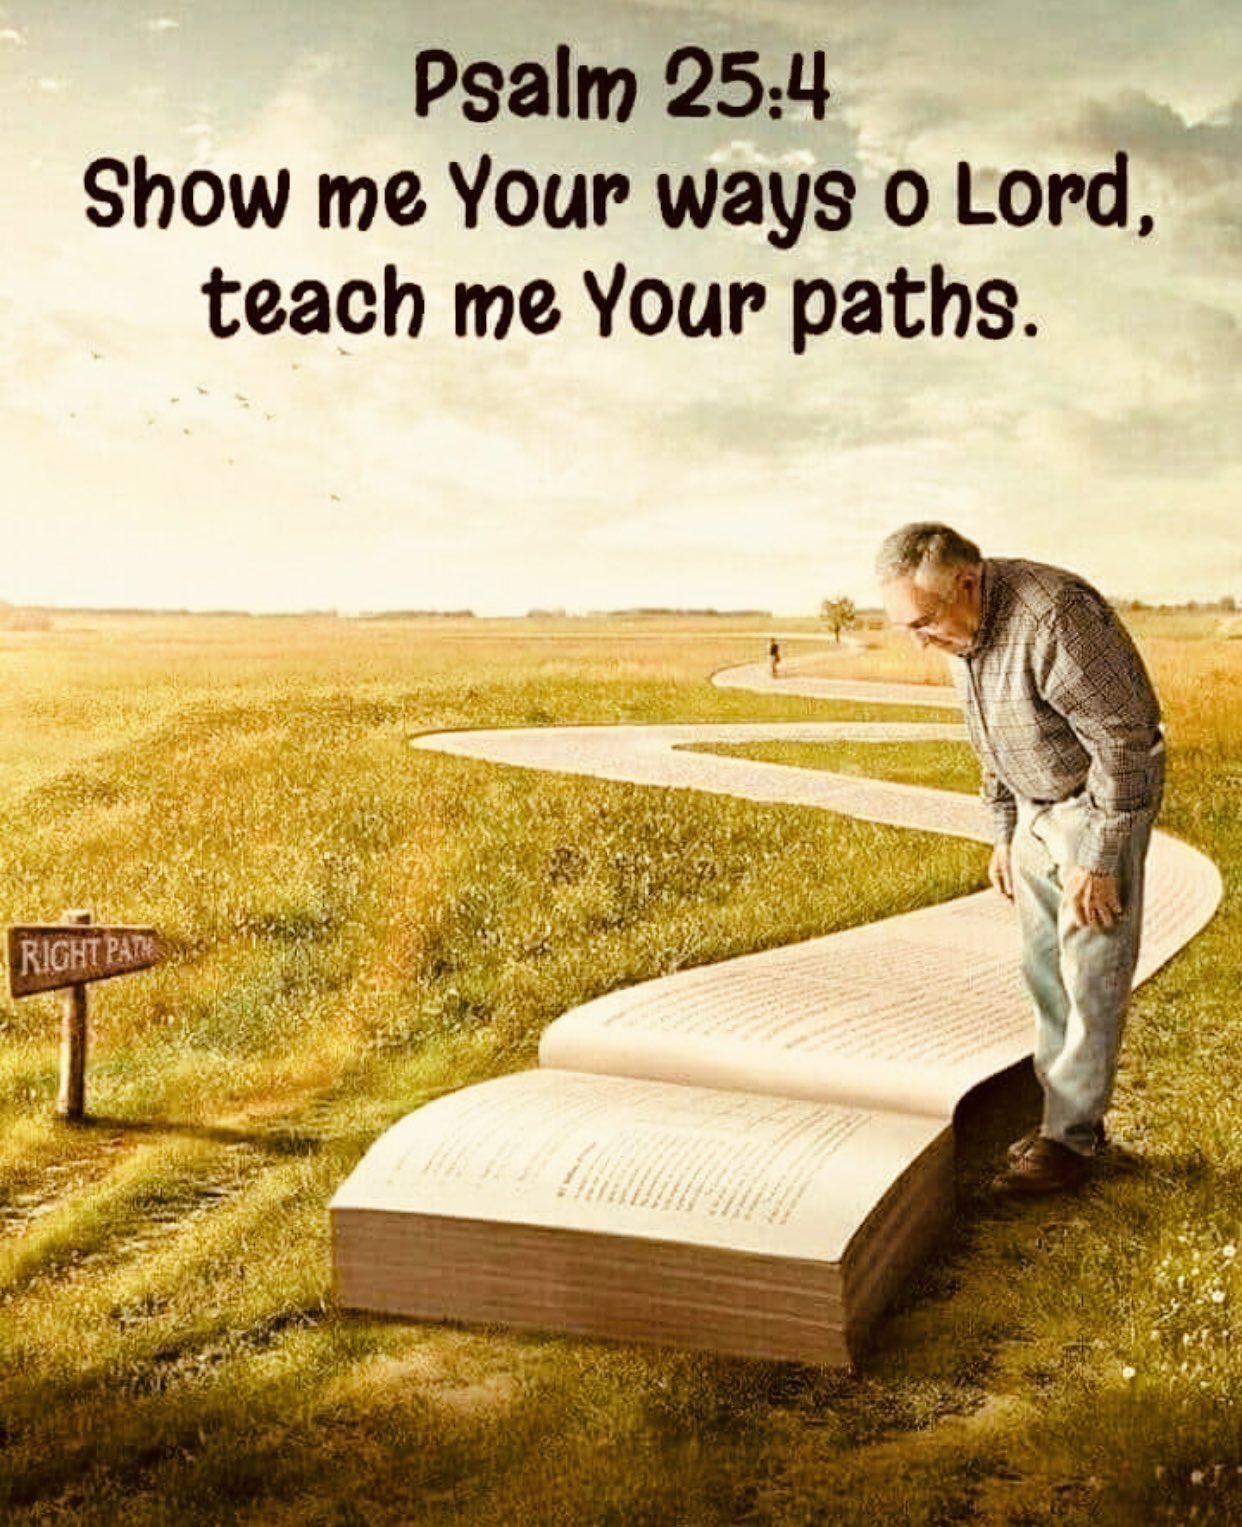 Psalm 25.4 Show me Your ways 0 Lord, teach me Your paths: RIGHT PAn